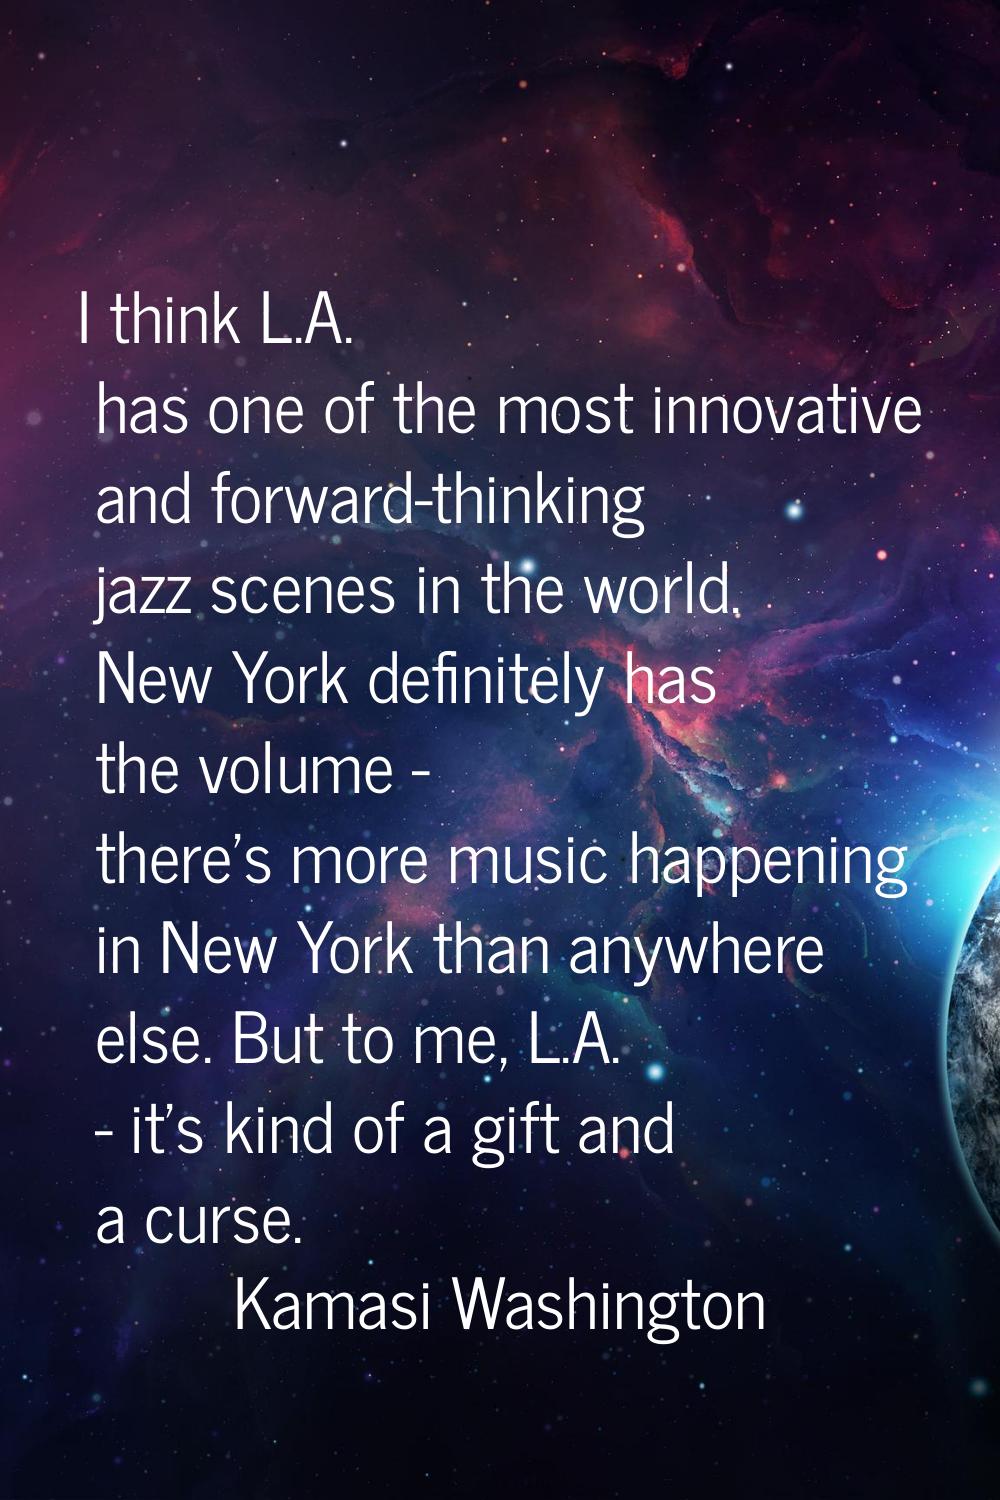 I think L.A. has one of the most innovative and forward-thinking jazz scenes in the world. New York